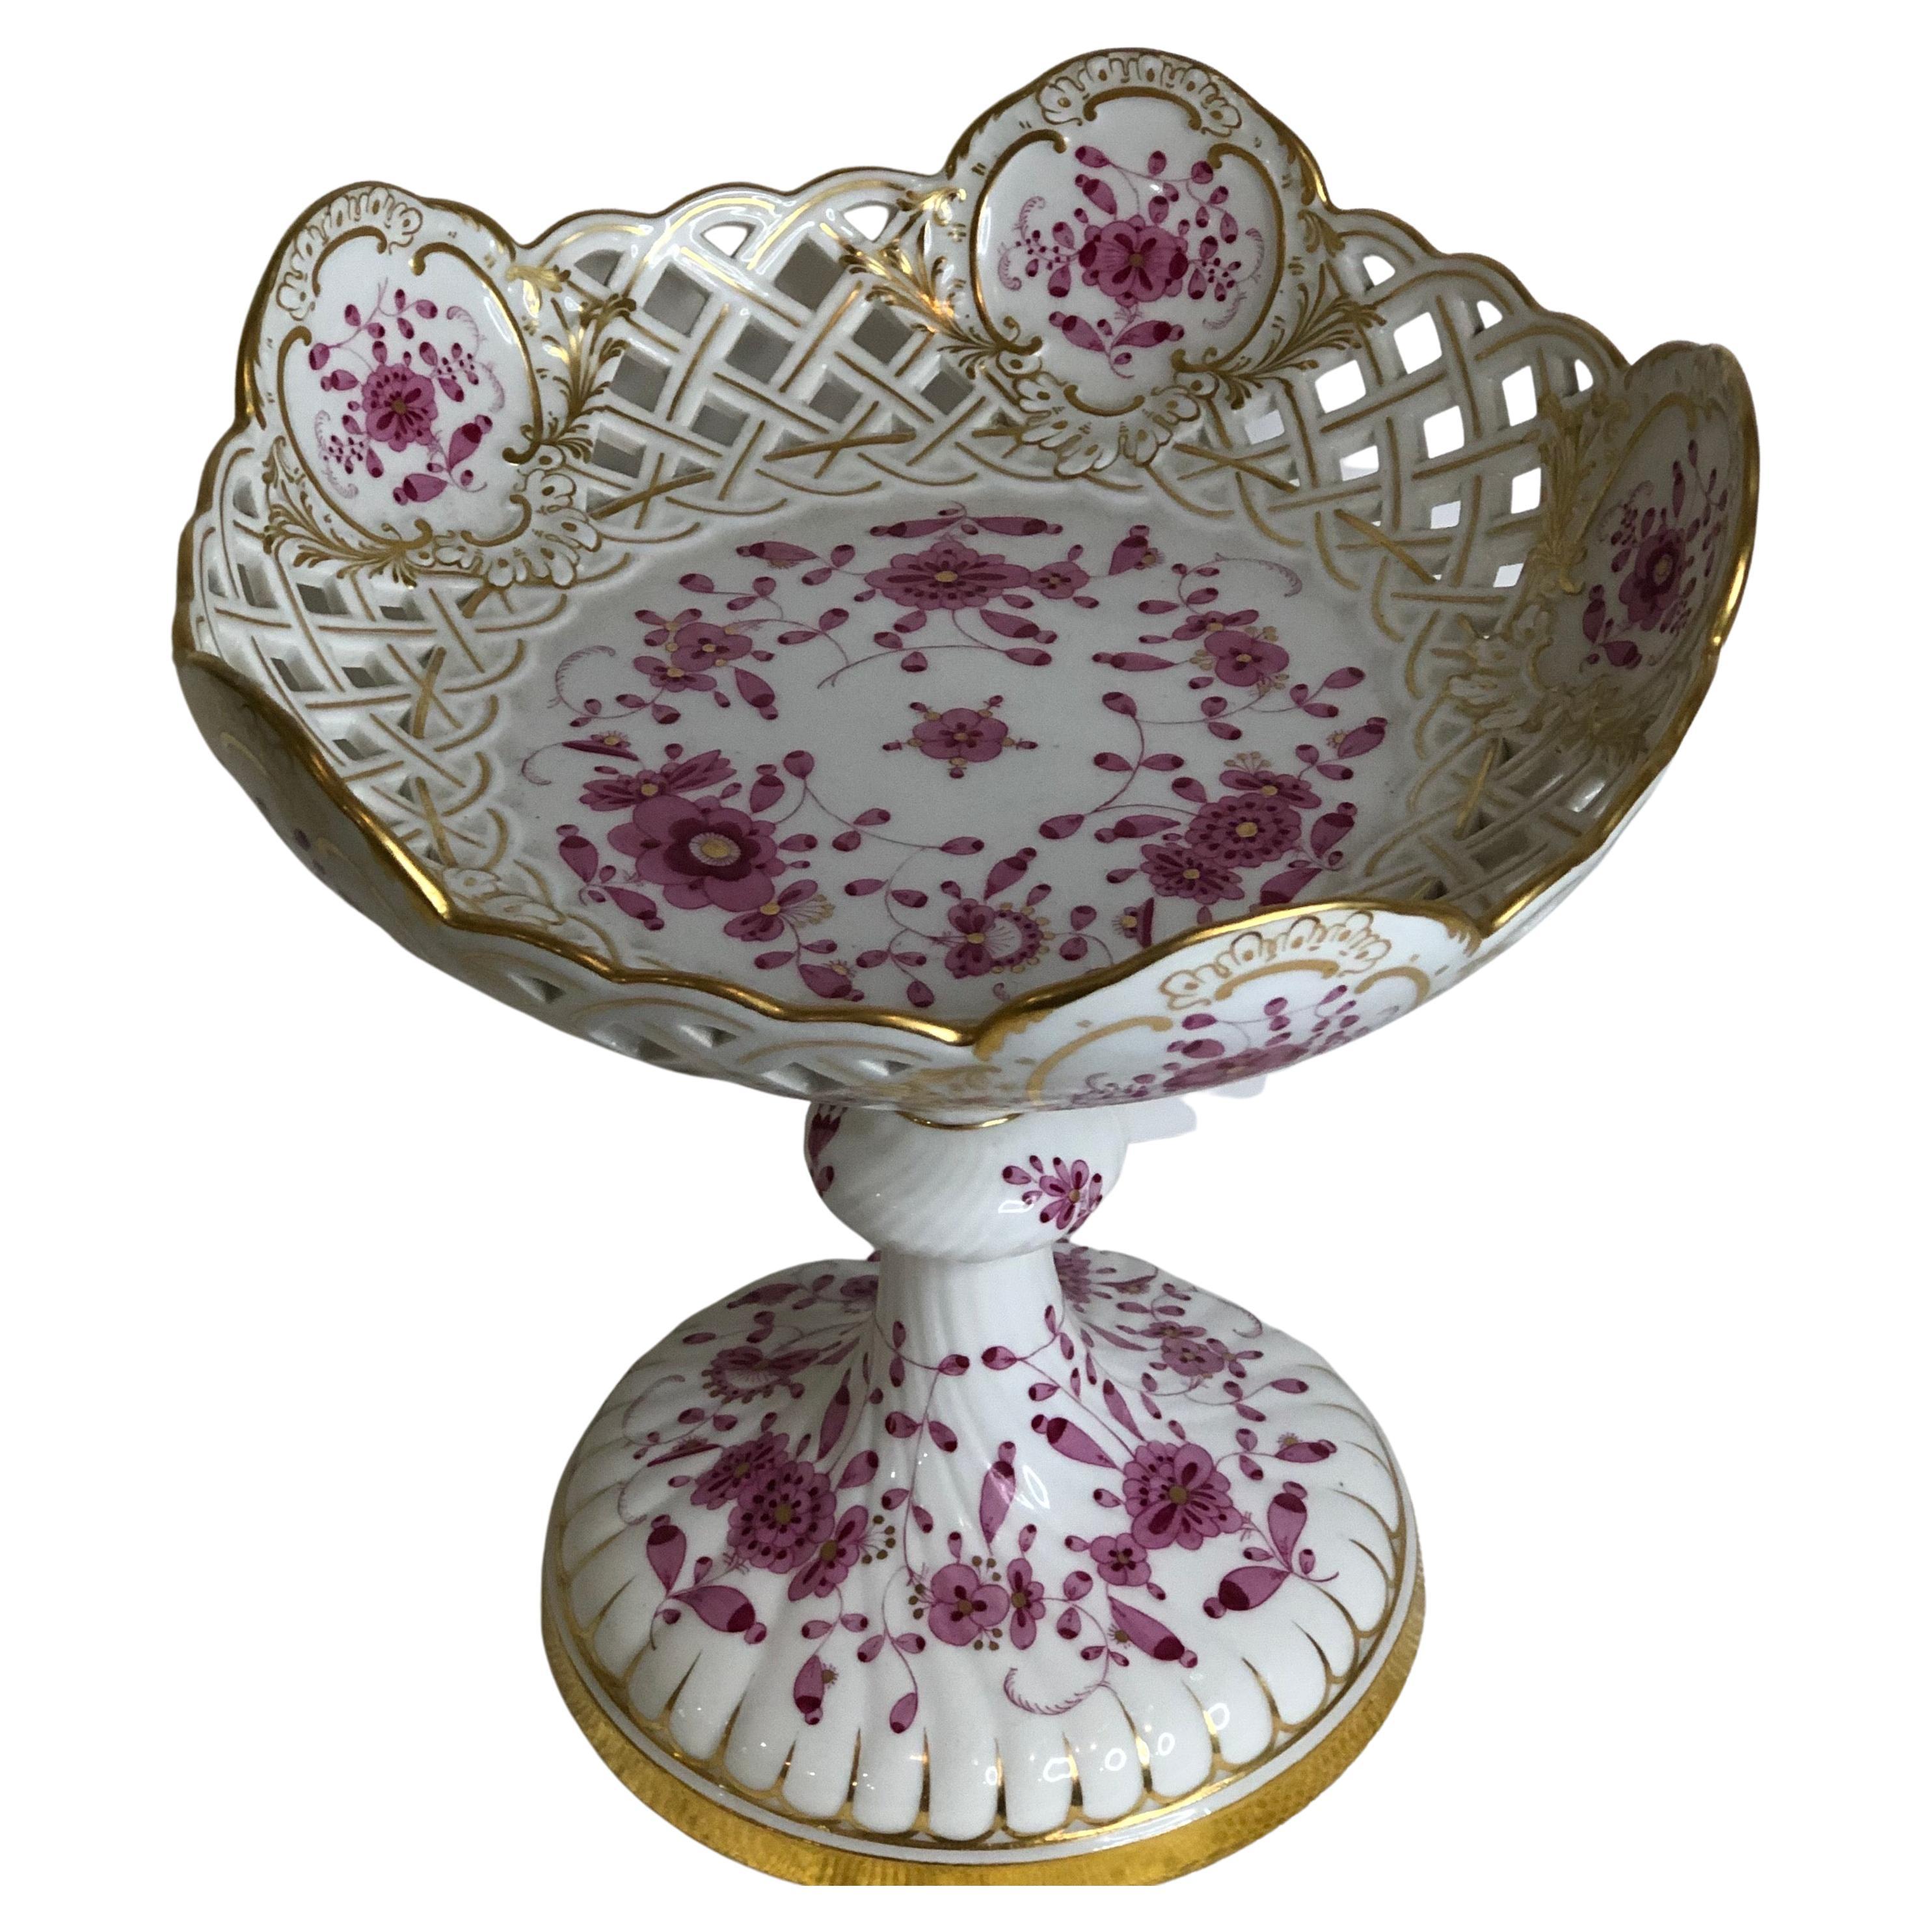 This tall Meissen reticulated purple Indian compote is very rare and extremely hard to find. It is a beautiful serving compote or decoration for your table, your sideboard or your cabinet. It would make a stunning addition to any table setting.